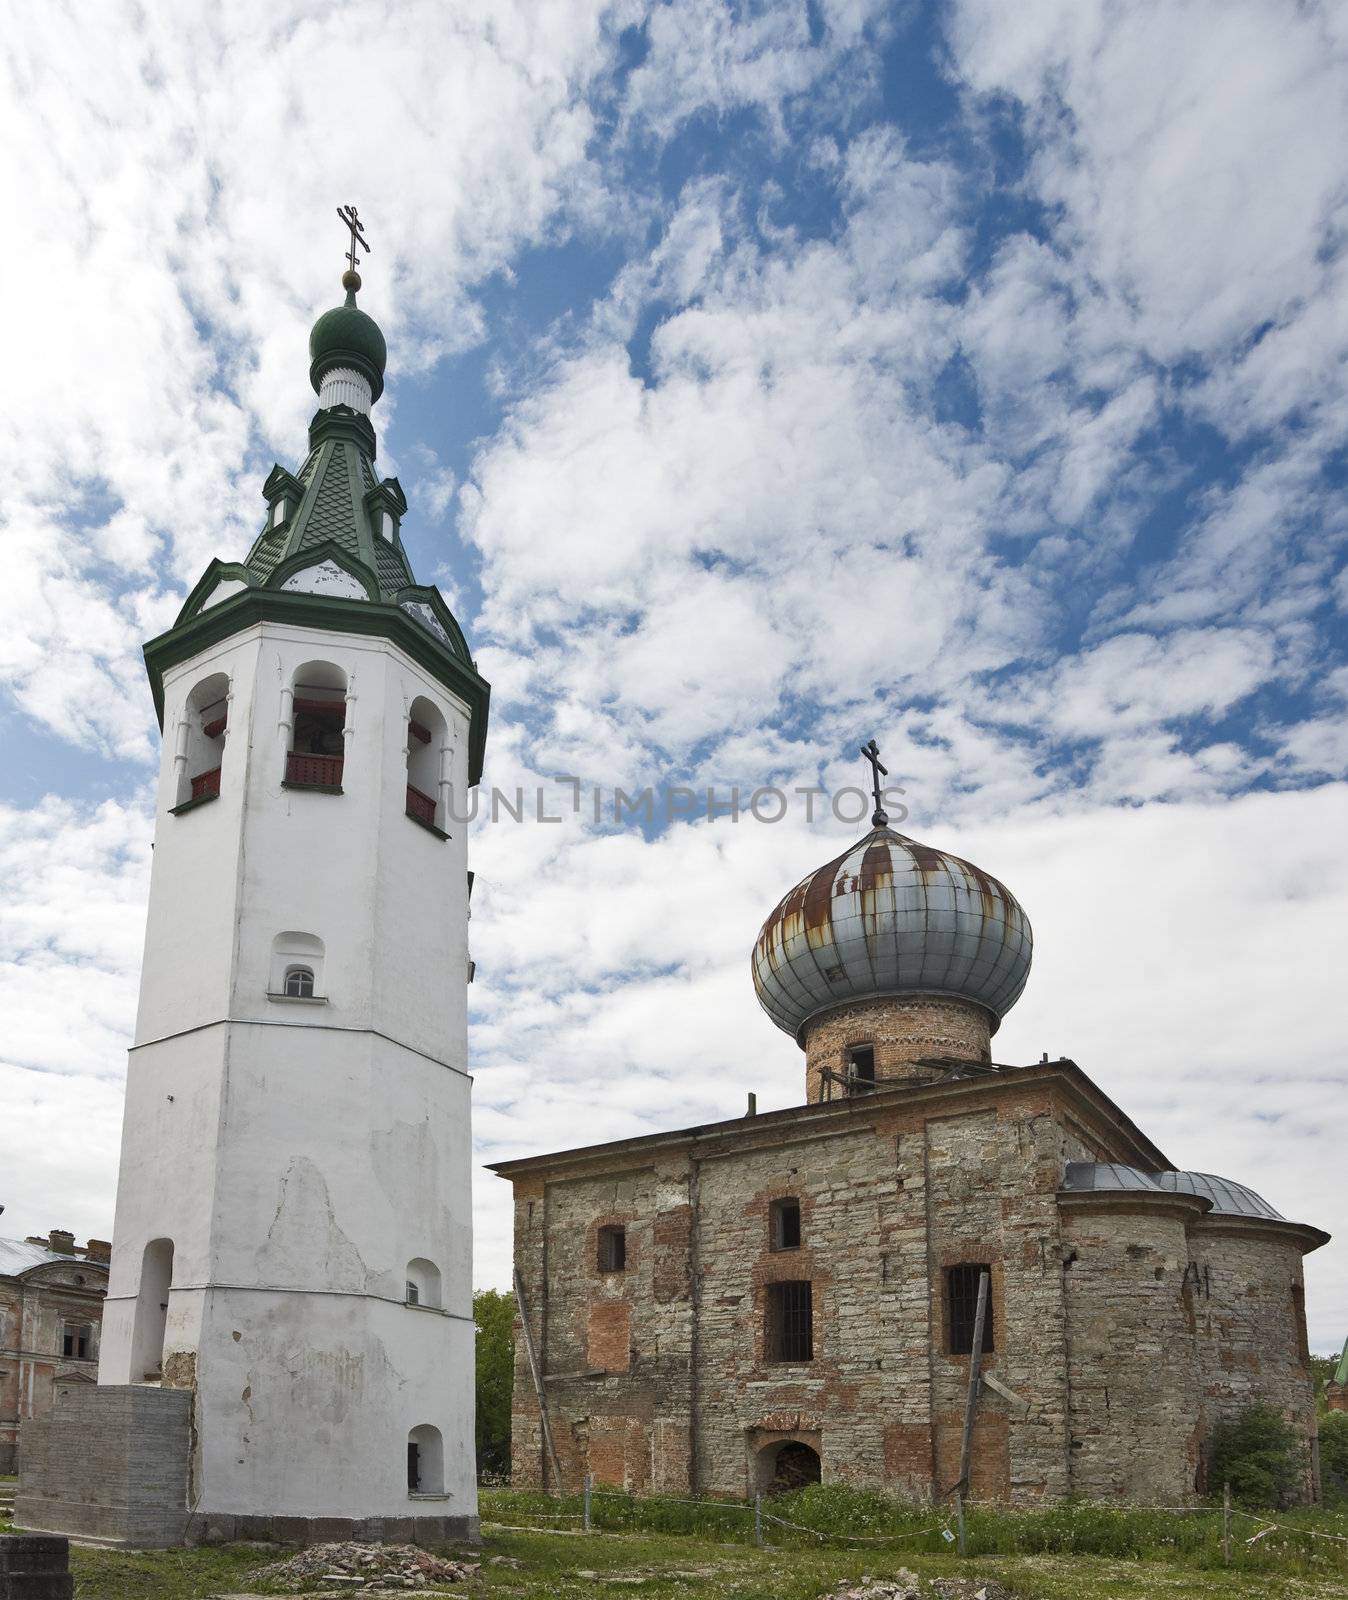 Church ruins and white belltower in renovating monastery